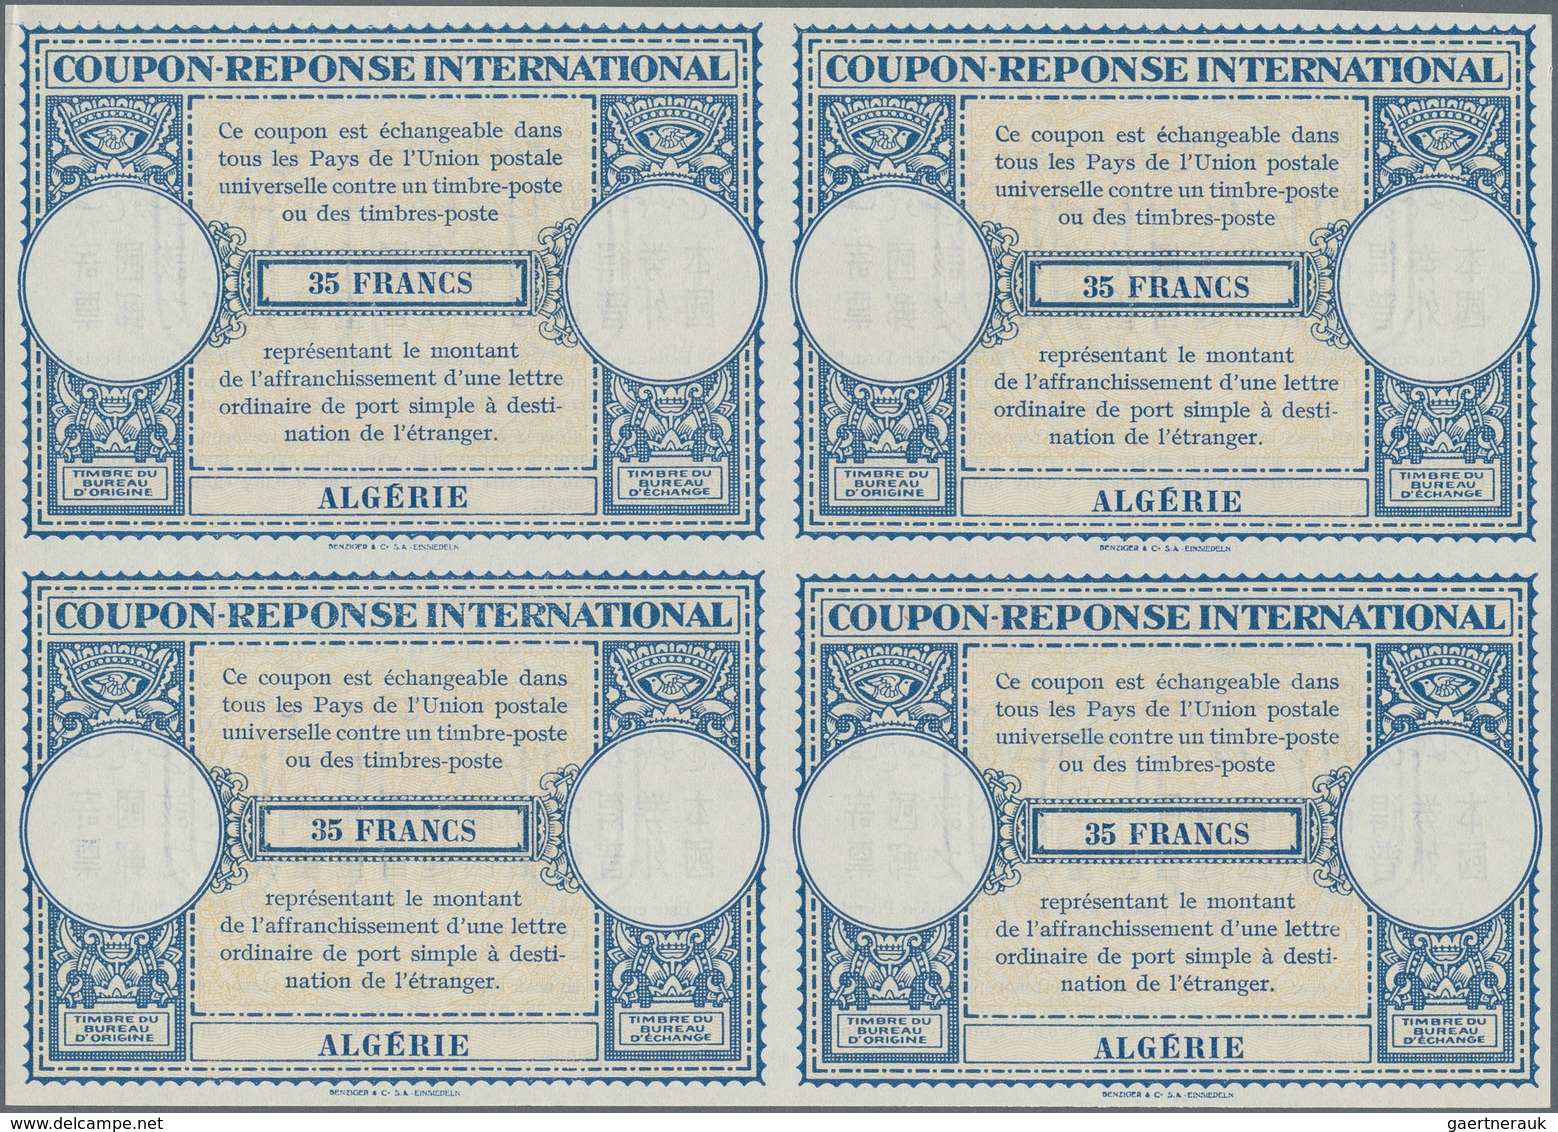 Algerien: 1950s (approx). International Reply Coupon 35 Francs (London Type) In An Unused Block Of 4 - Briefe U. Dokumente